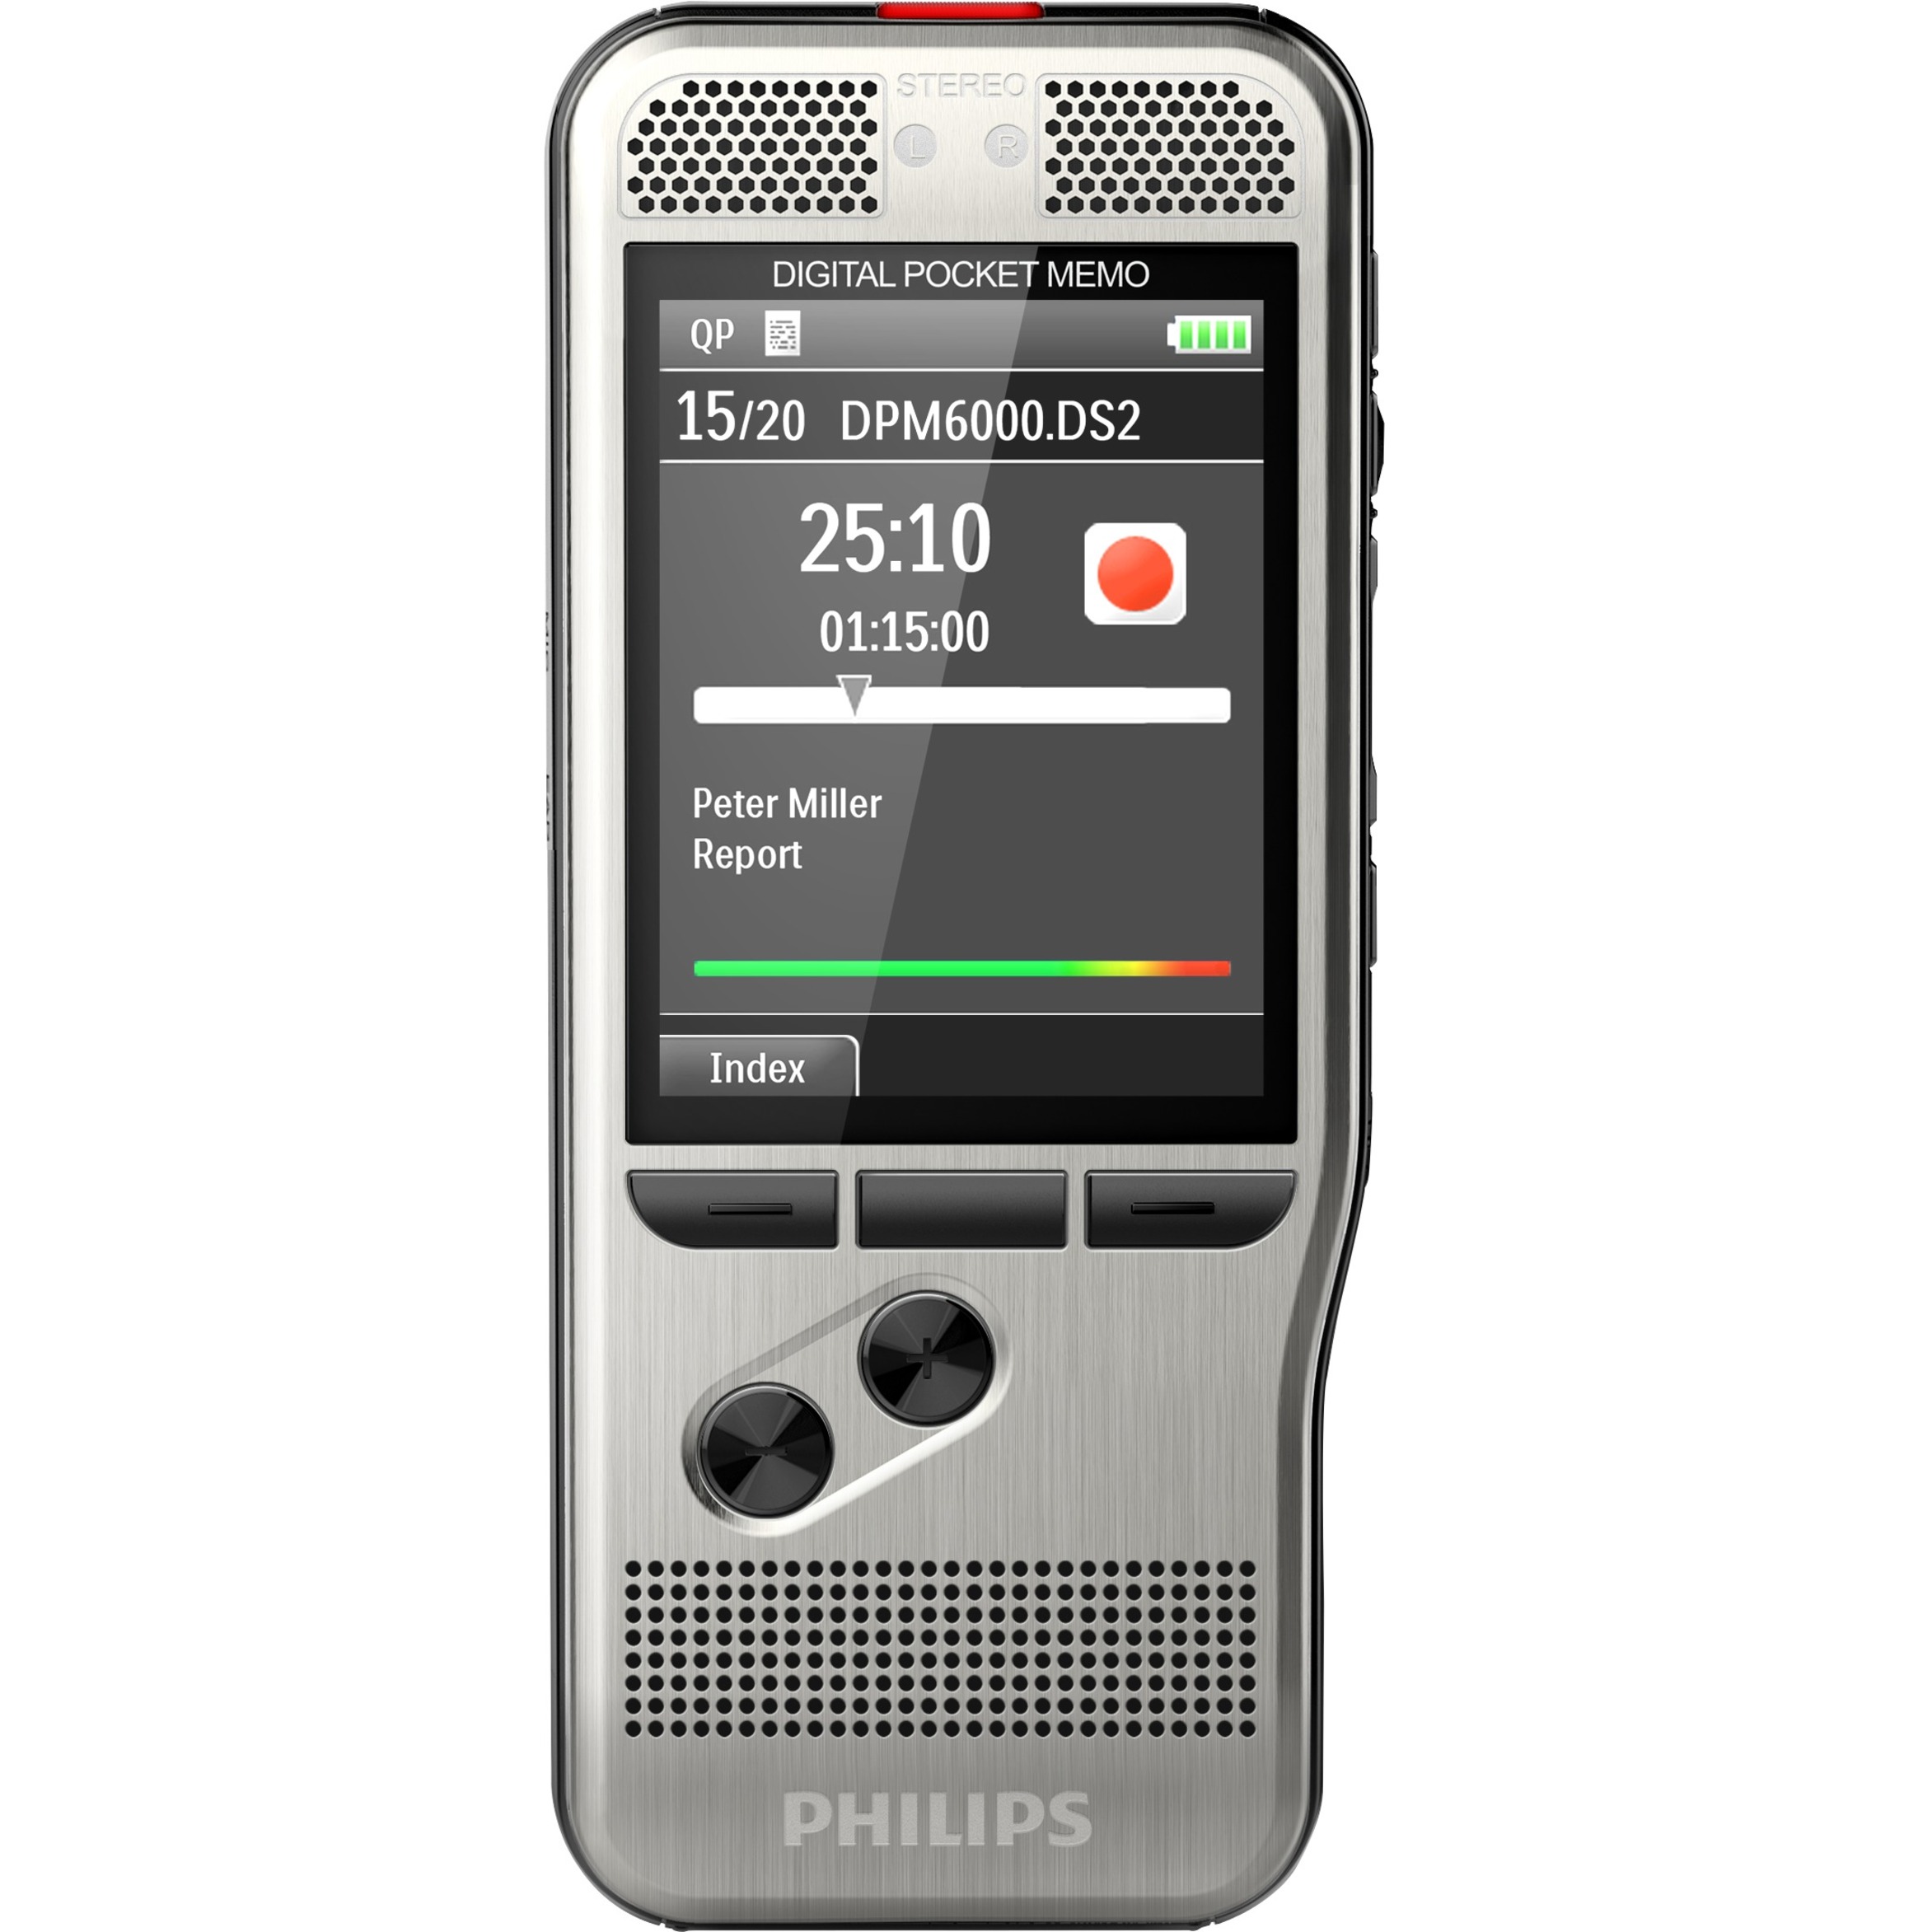 Philips Pocket Memo Digital Voice Recorder with LCD Display, DPM6000 - image 1 of 7